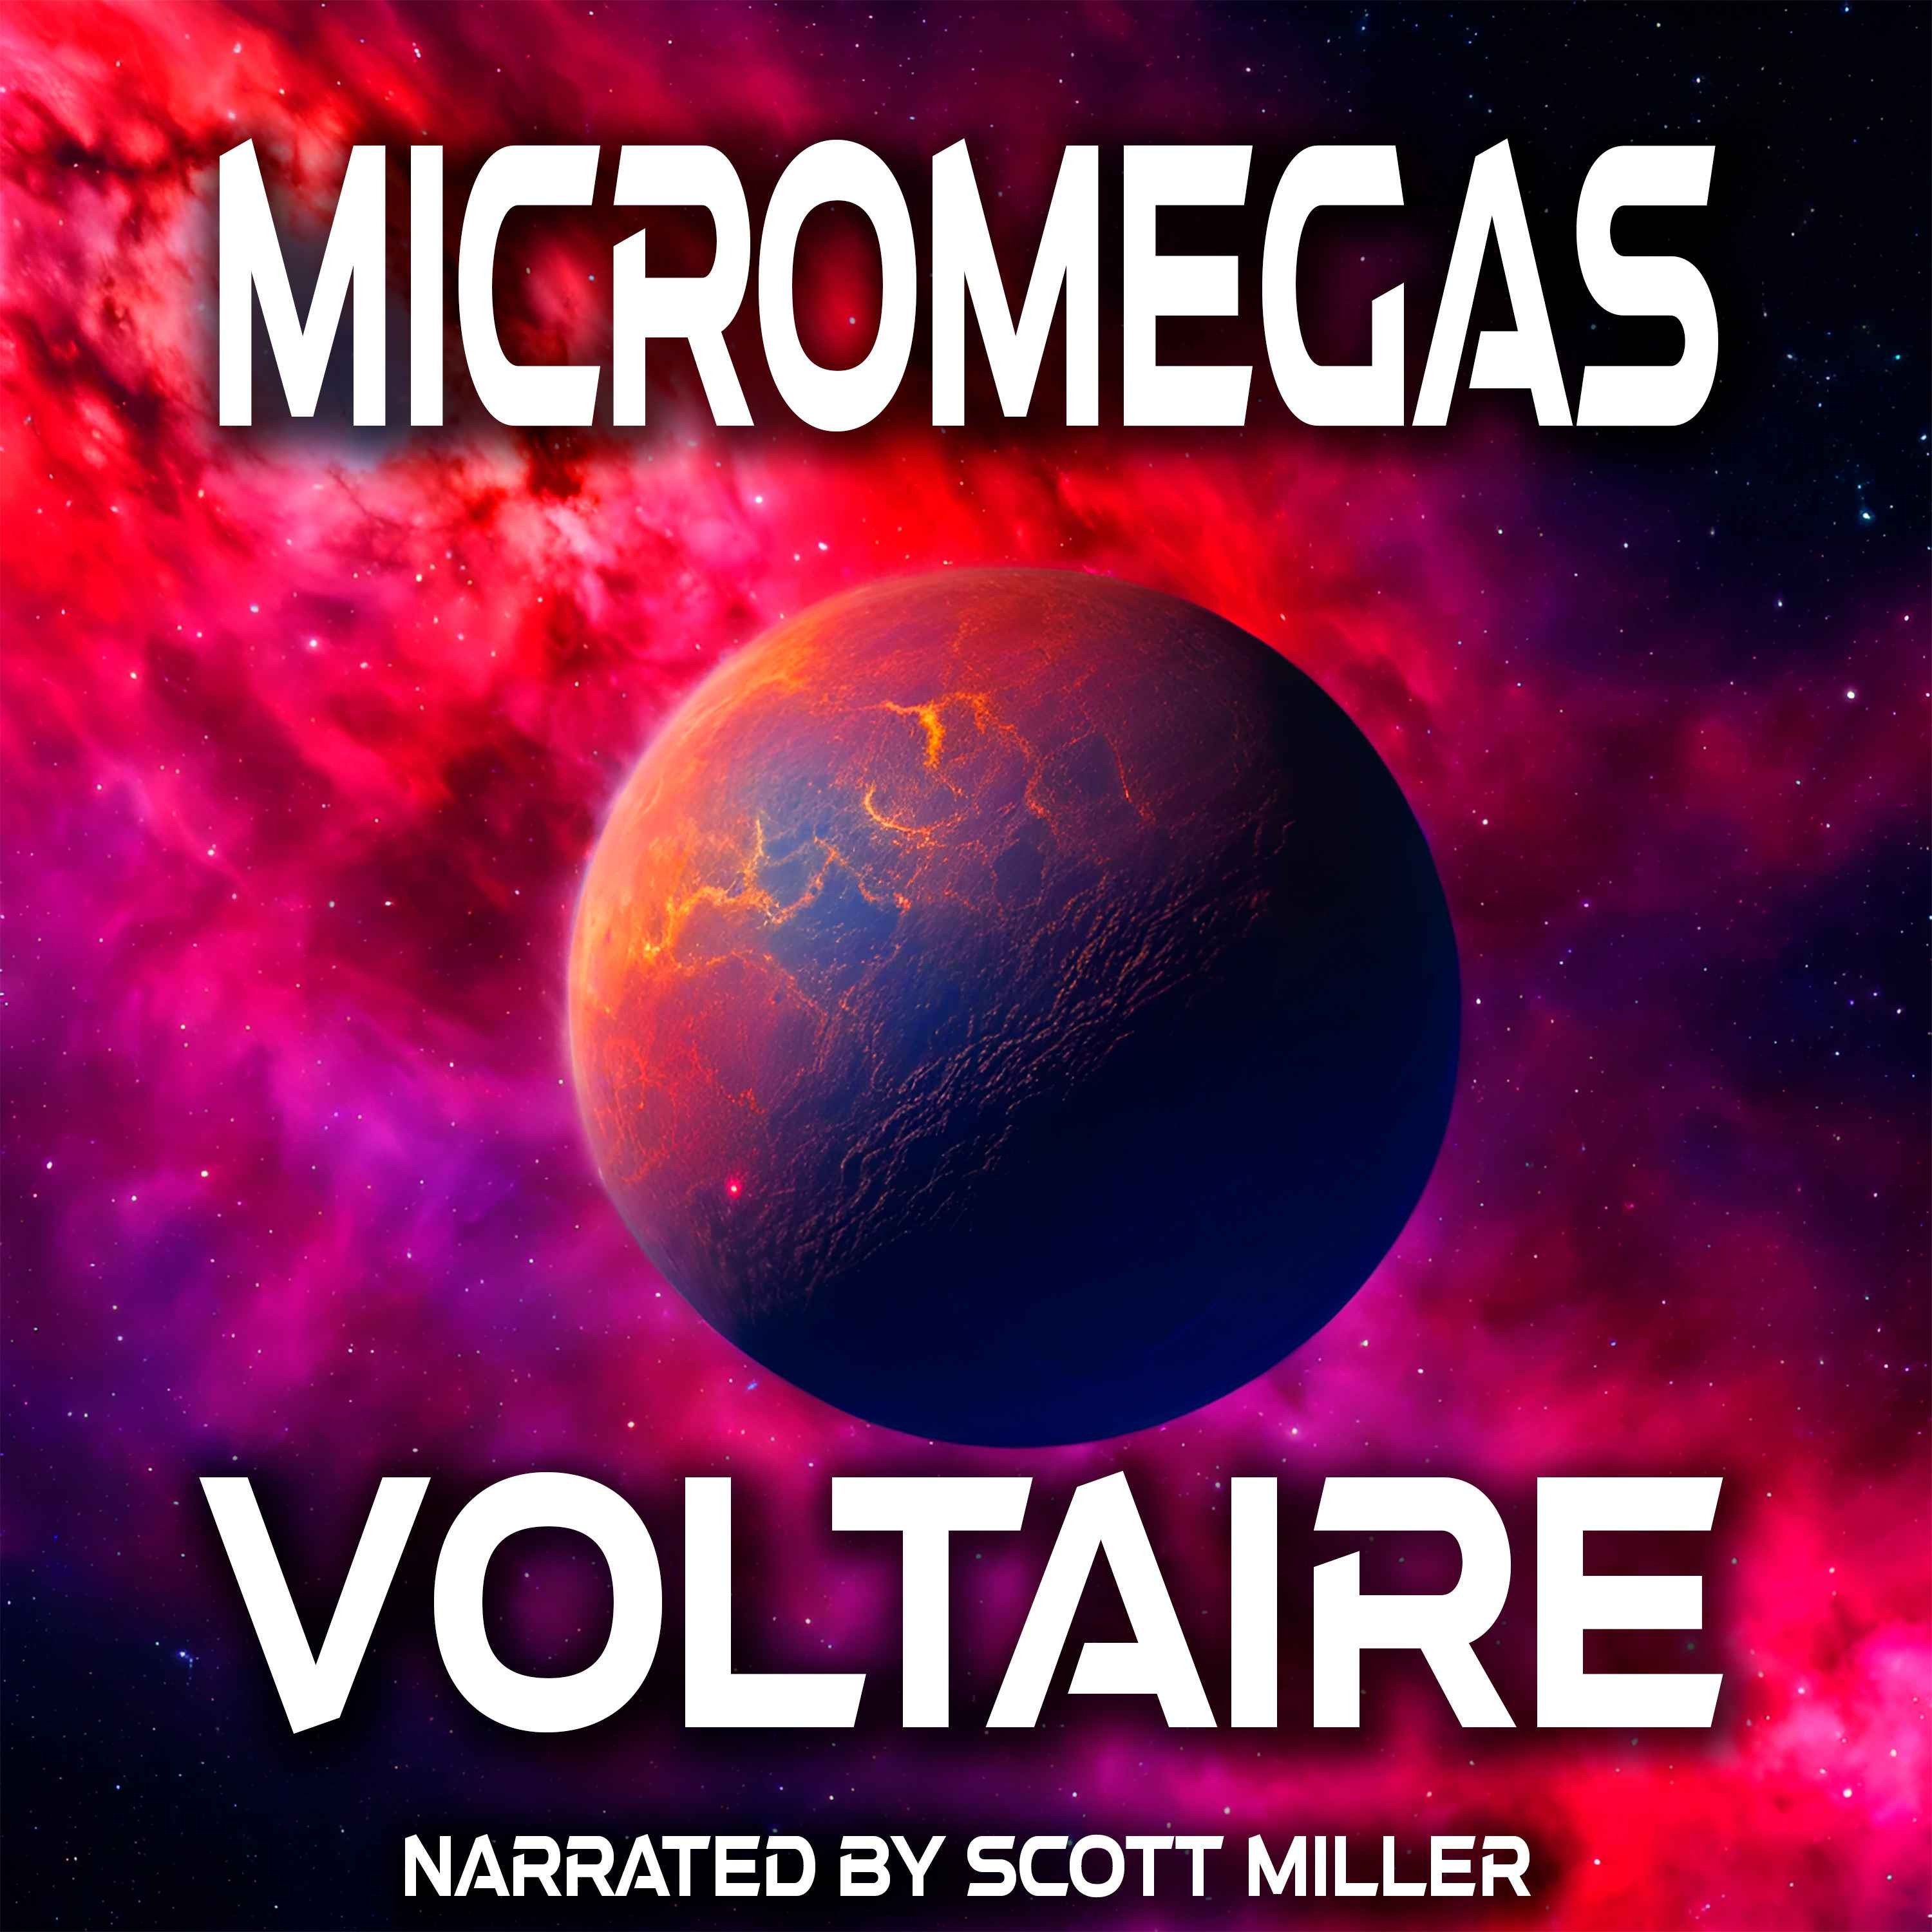 Micromegas by Voltaire - Science Fiction from the 1700s